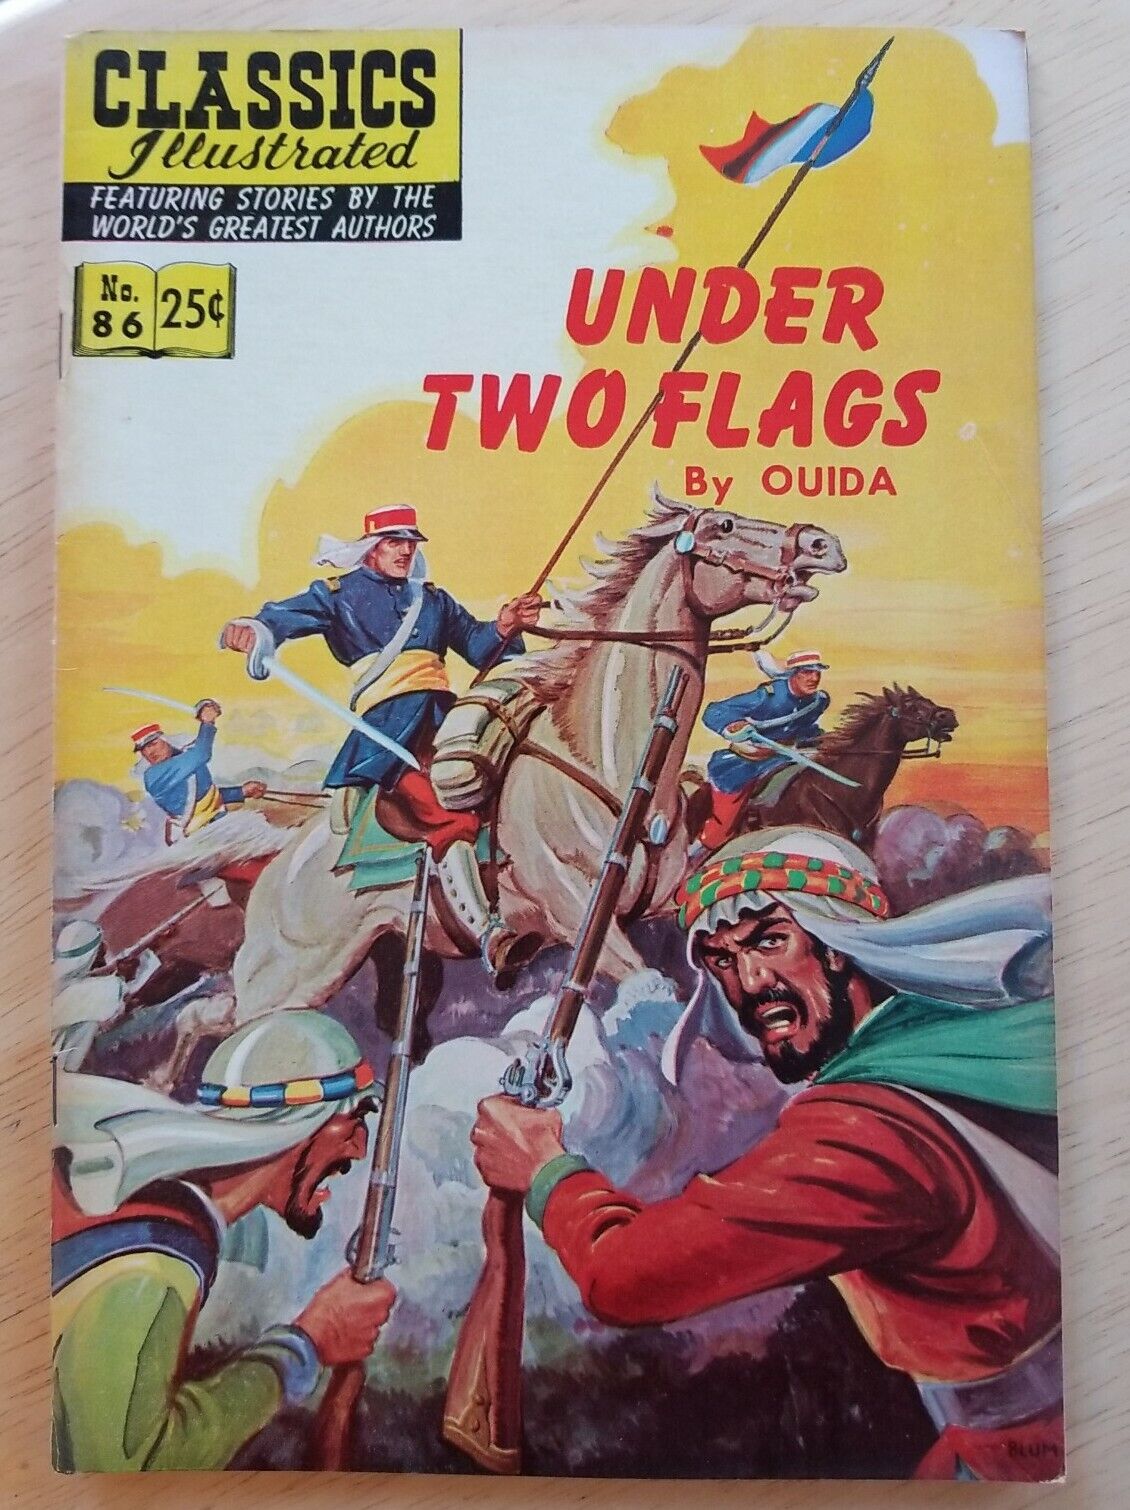 Vintage comic book Classics Illustrated #86 1969 Under Two Flags by Ouida Rare